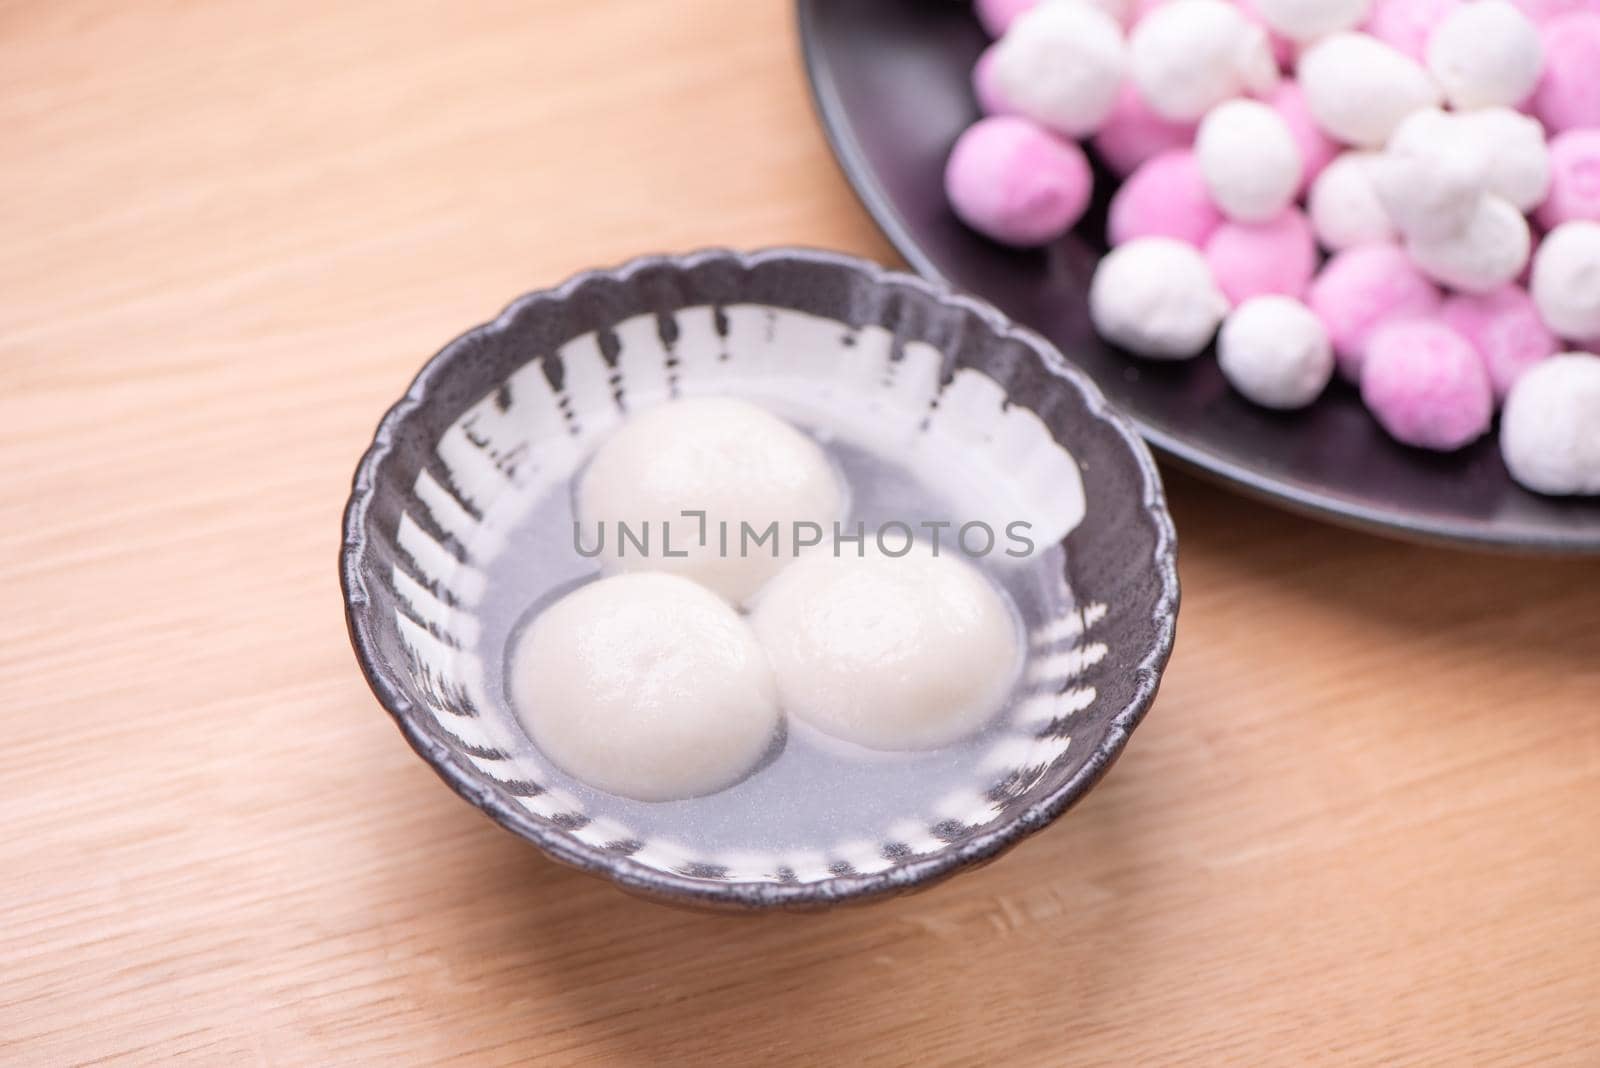 Delicious tang yuan, yuanxiao in a small bowl. Traditional festive food rice dumplings ball with stuffed fillings for Chinese Lantern Festival, close up.